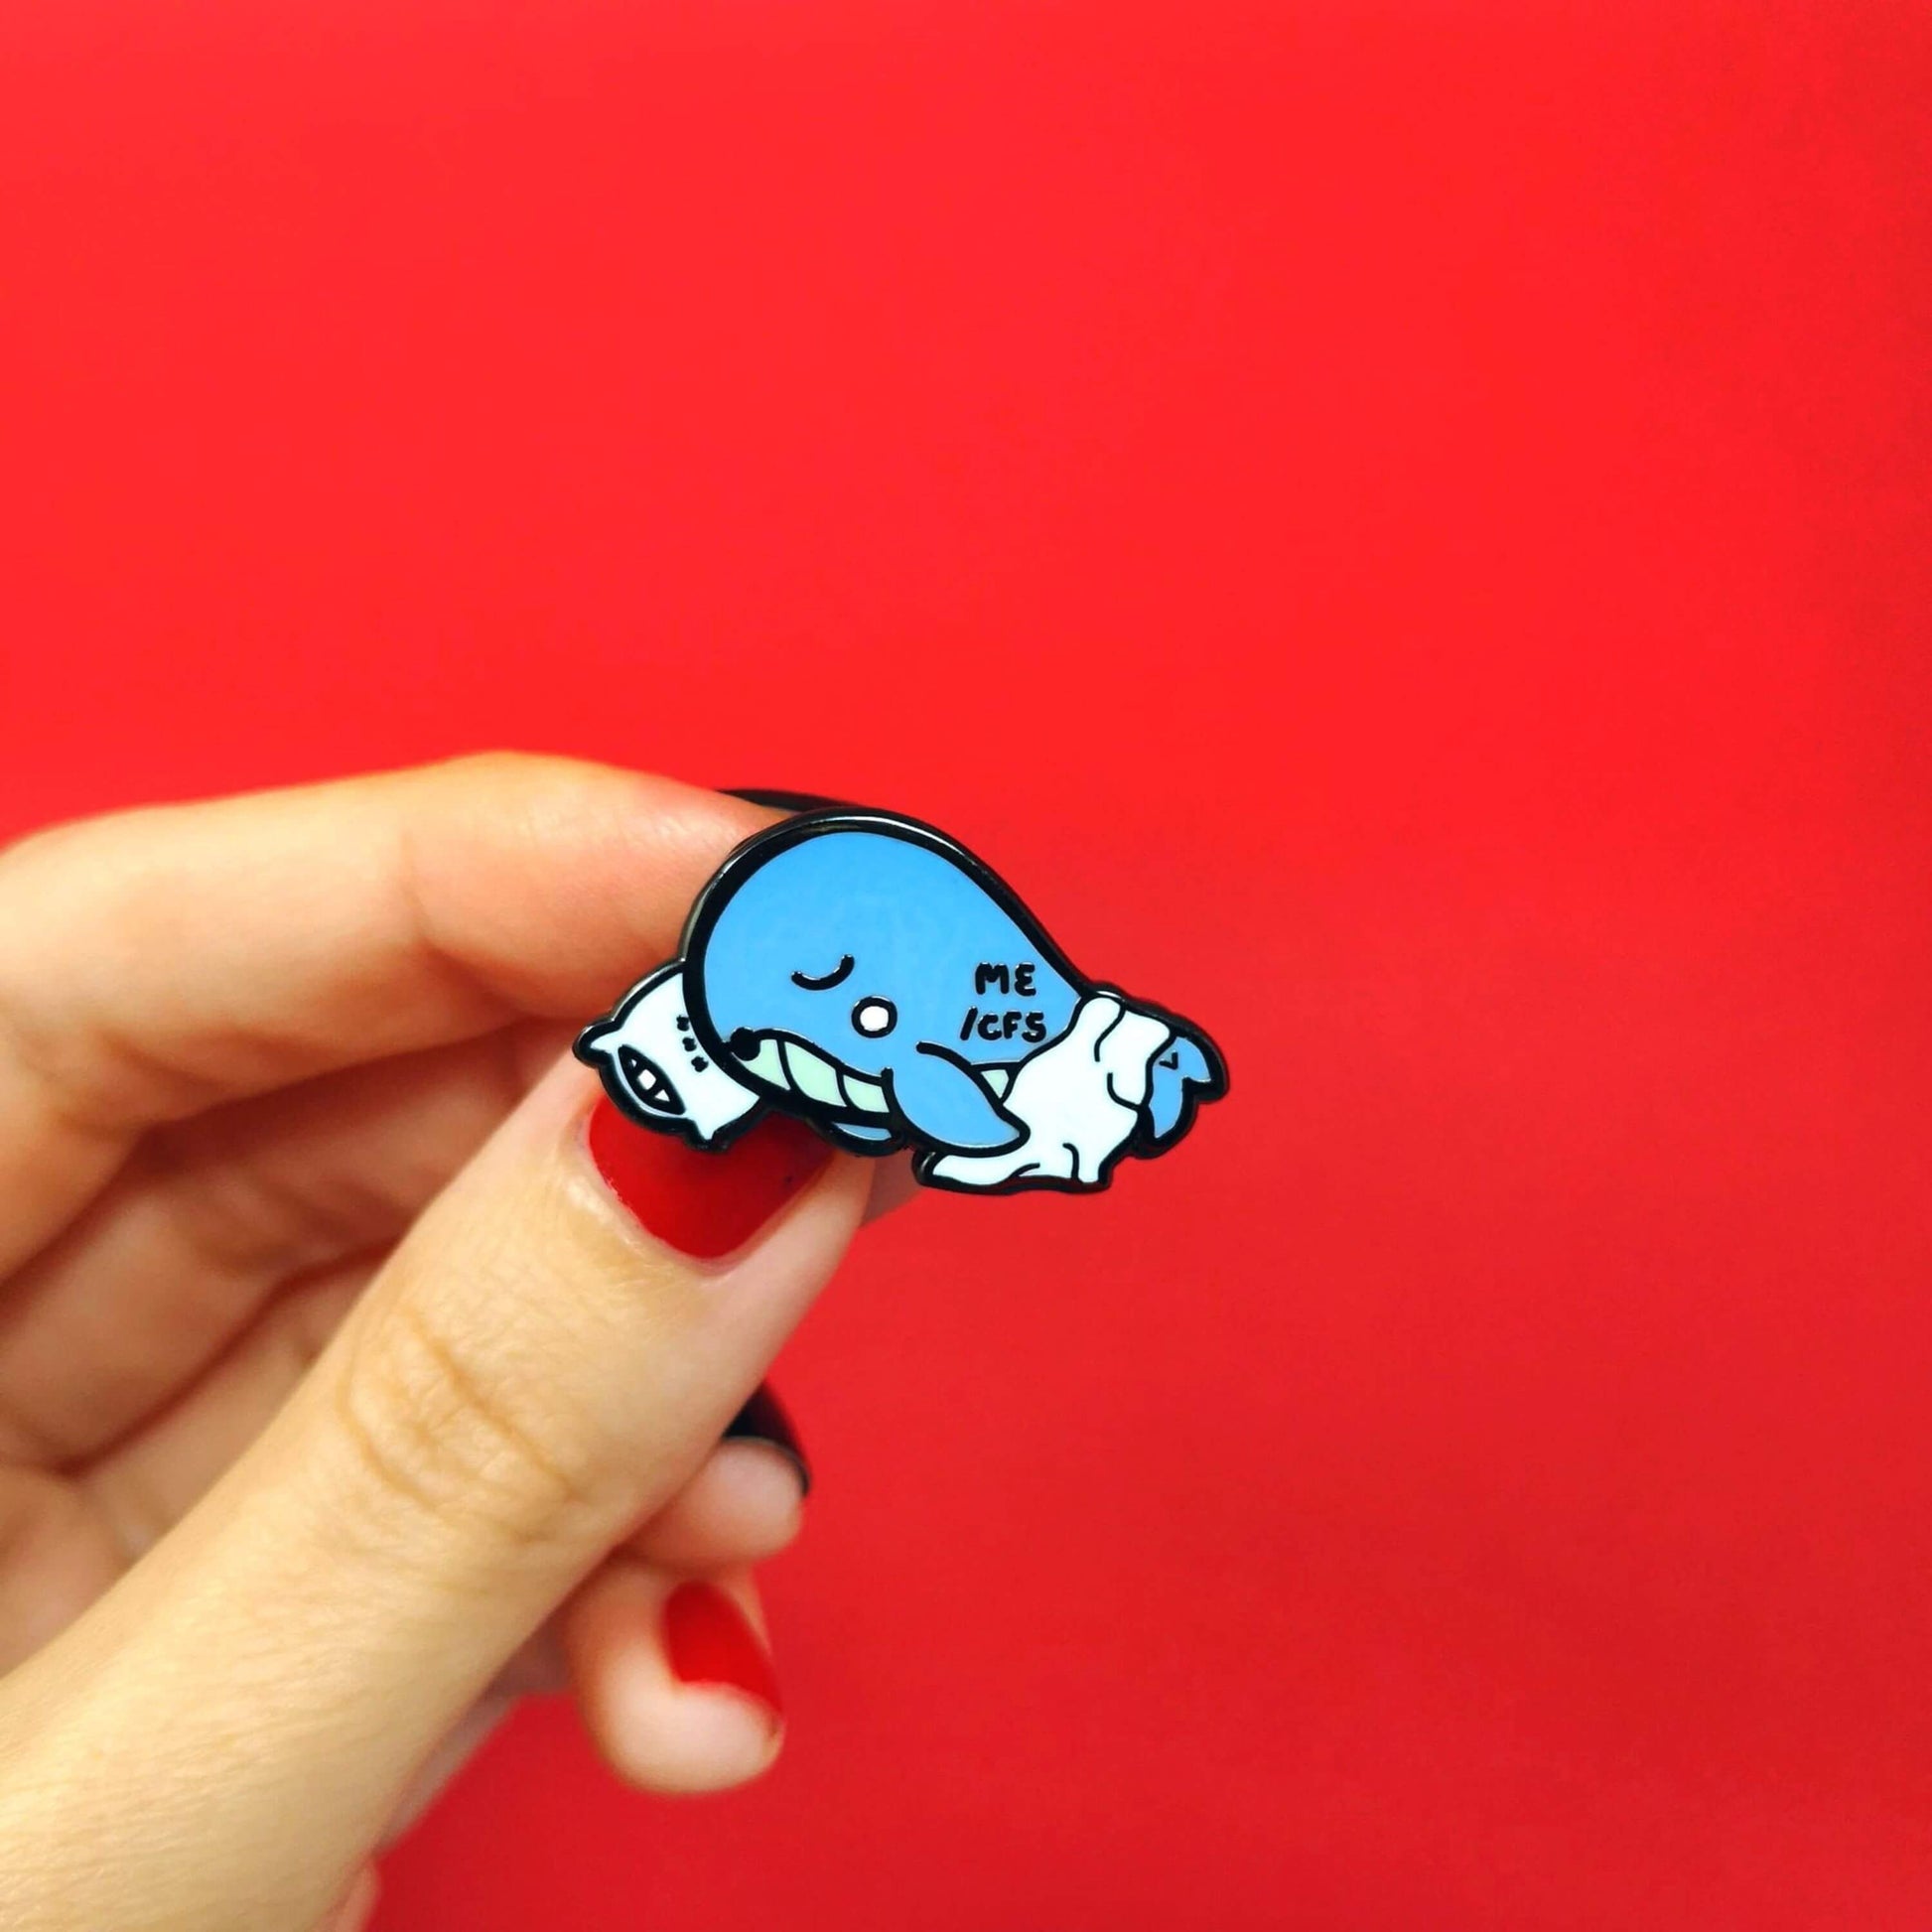 Mywhalegic Enamel Pin - Myalgic Encephalomyelitis (ME/CFS) held by a hand on a red background. The enamel pin is a sleeping blue whale laying on a white pillow with a white blanket over it and ME/CFS written on its back. The enamel pin is designed to raise awareness for Myalgic encephalomyelitis or chronic fatigue syndrome